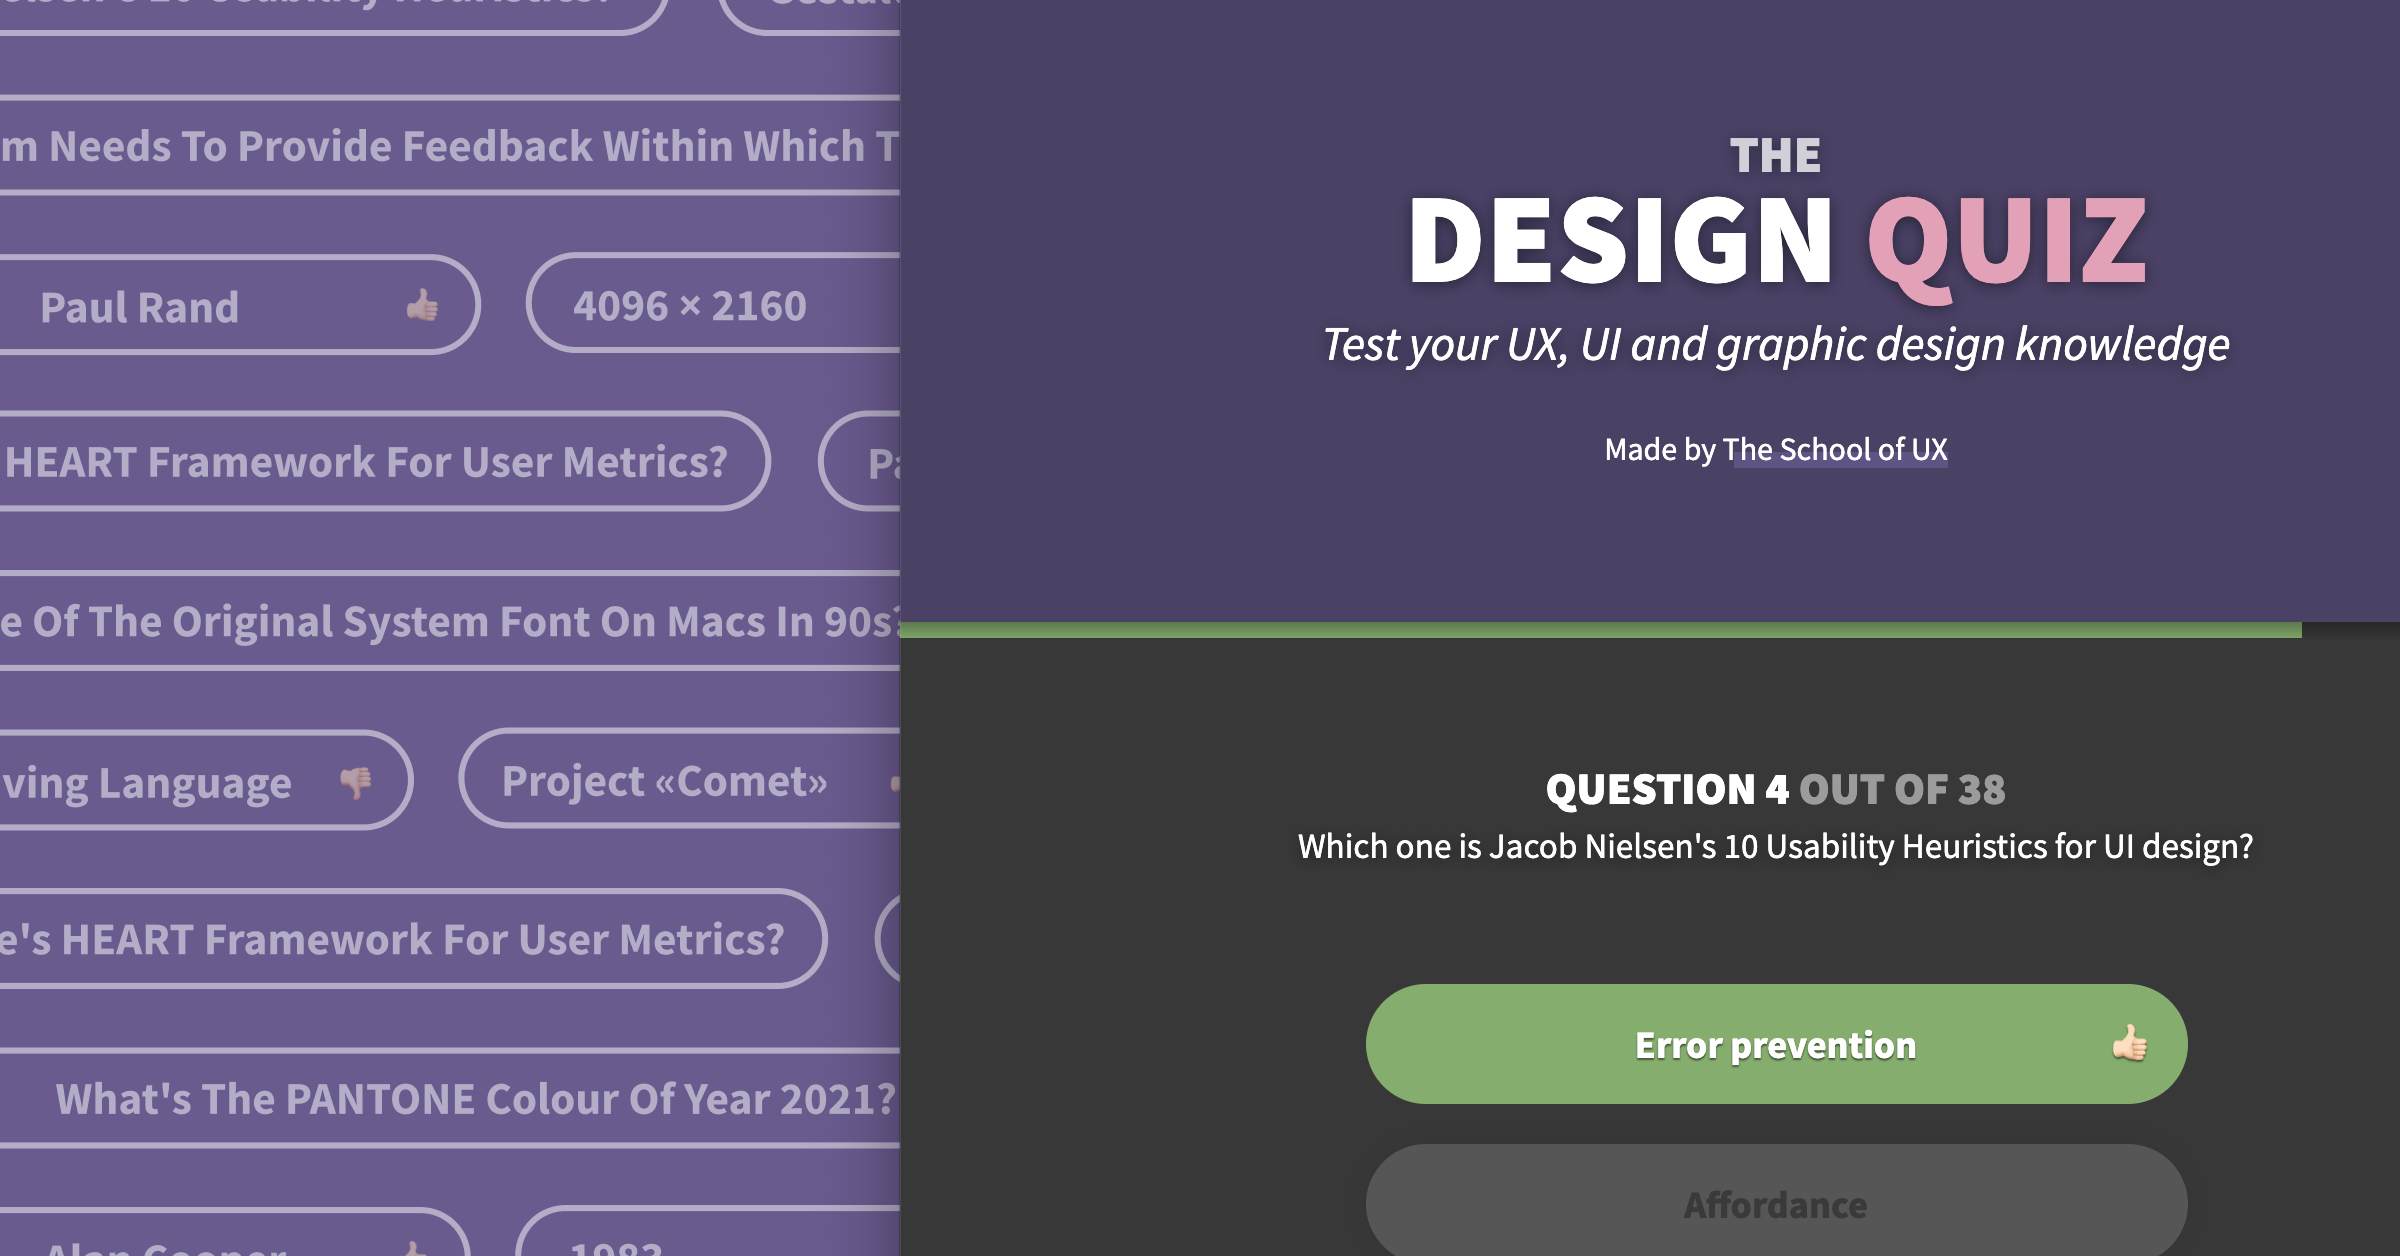 The Design Quiz: test your UX, UI and graphic design knowledge